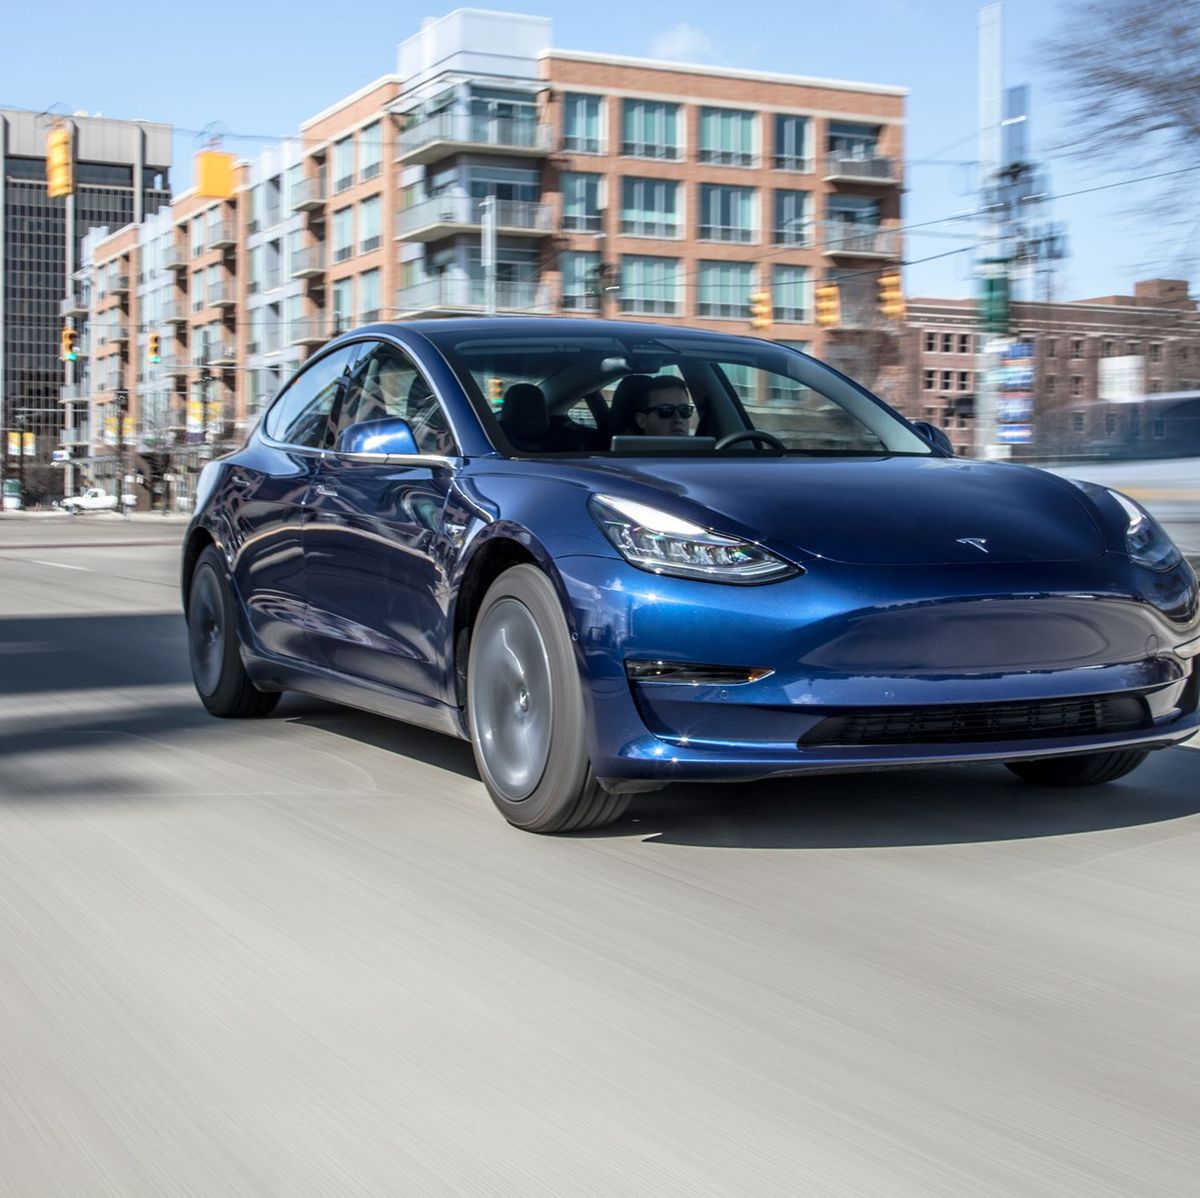 2018 Tesla Model 3 review: ratings, specs, photos, price and more - CNET